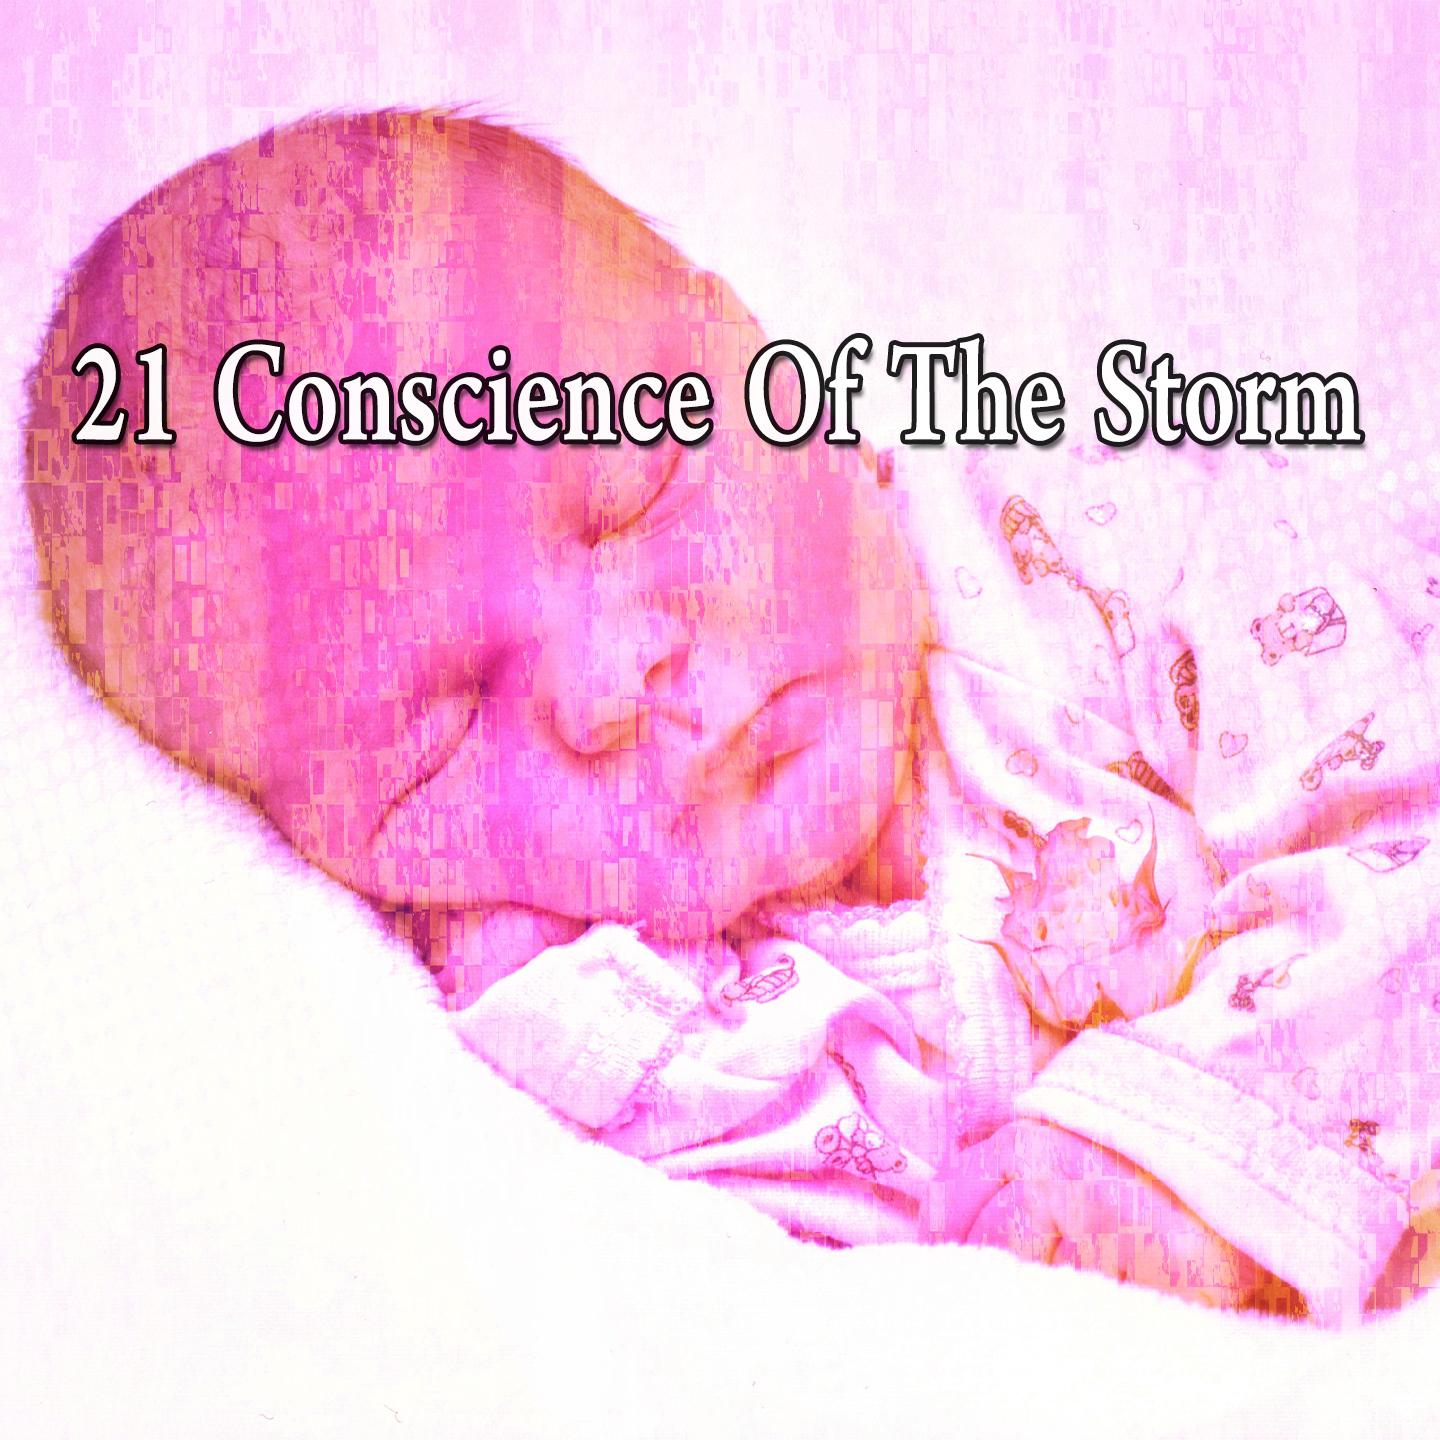 21 Conscience of the Storm